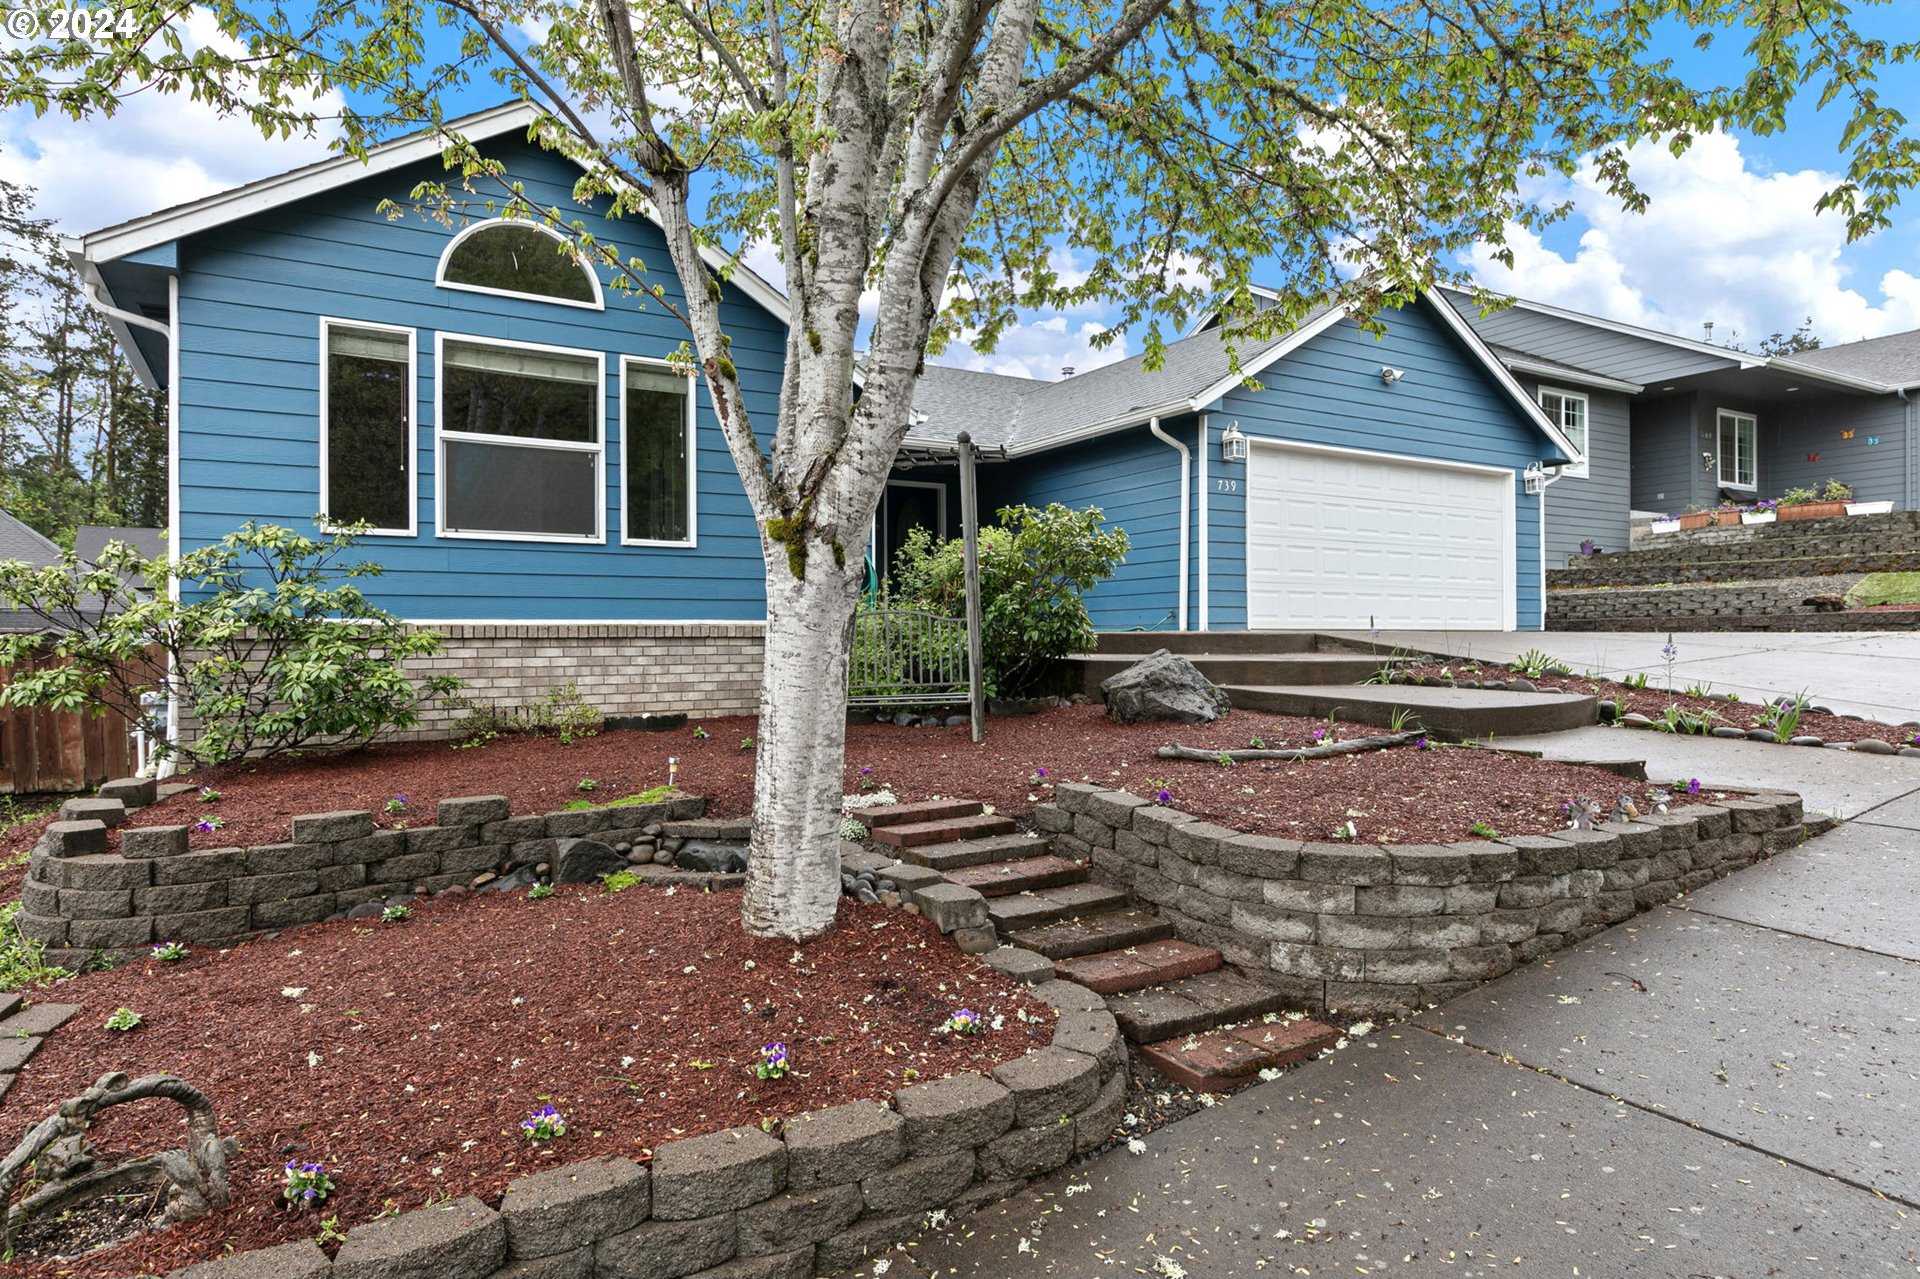 photo 2: 739 S 47TH PL, Springfield OR 97478